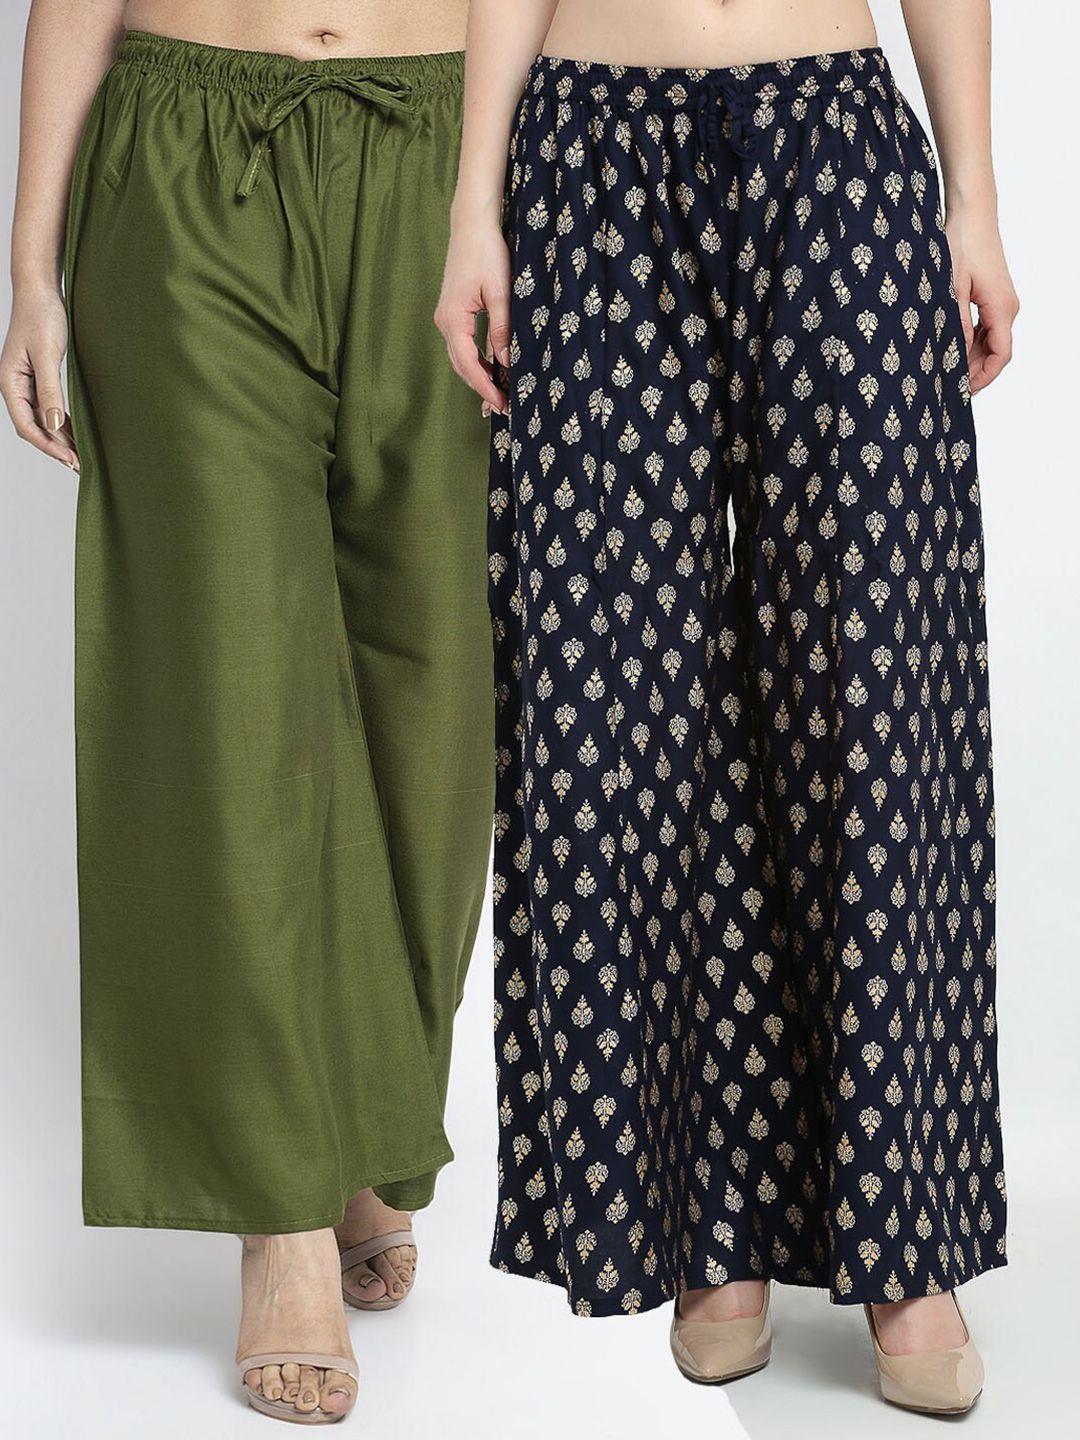 jinfo-women-pack-of-2-olive-green-&-navy-blue-ethnic-palazzos